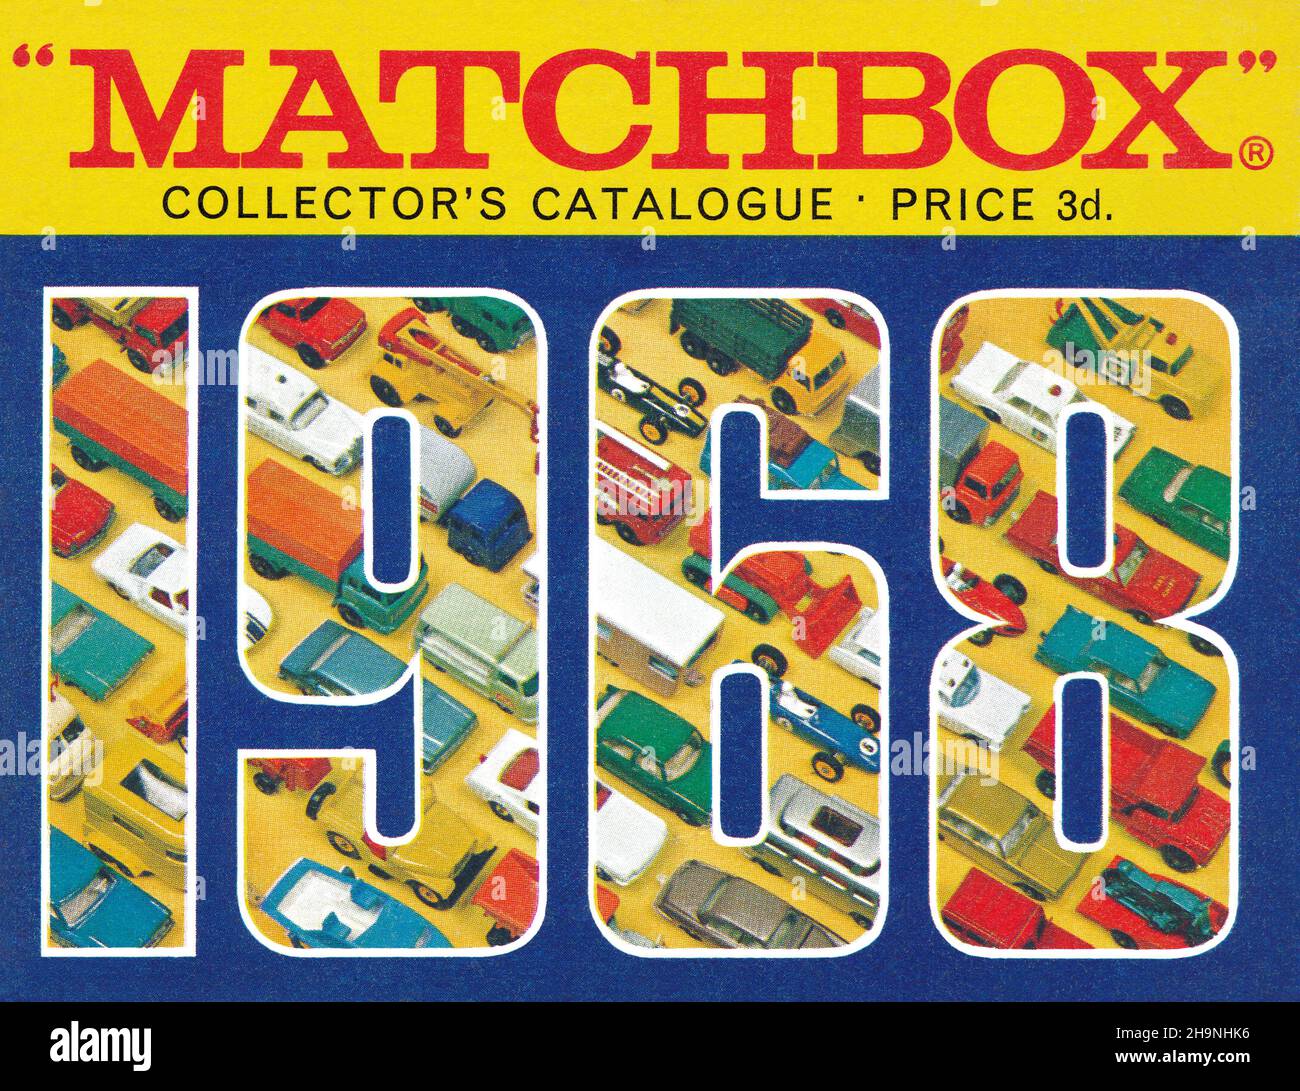 1968 catalogue for Matchbox die-cast toys. Stock Photo